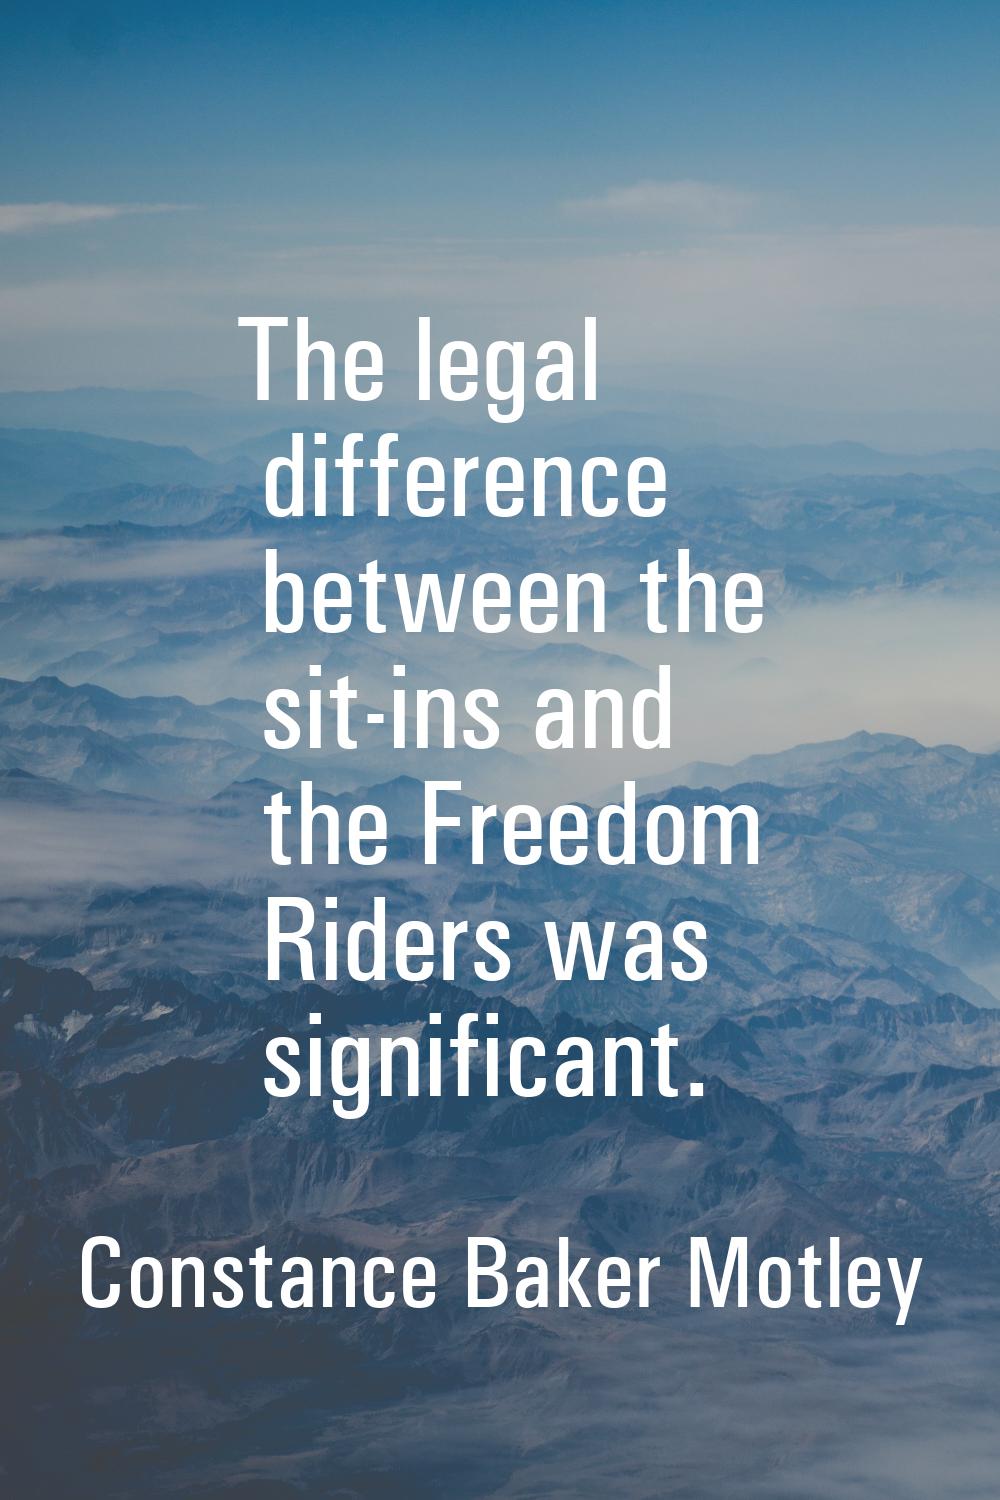 The legal difference between the sit-ins and the Freedom Riders was significant.